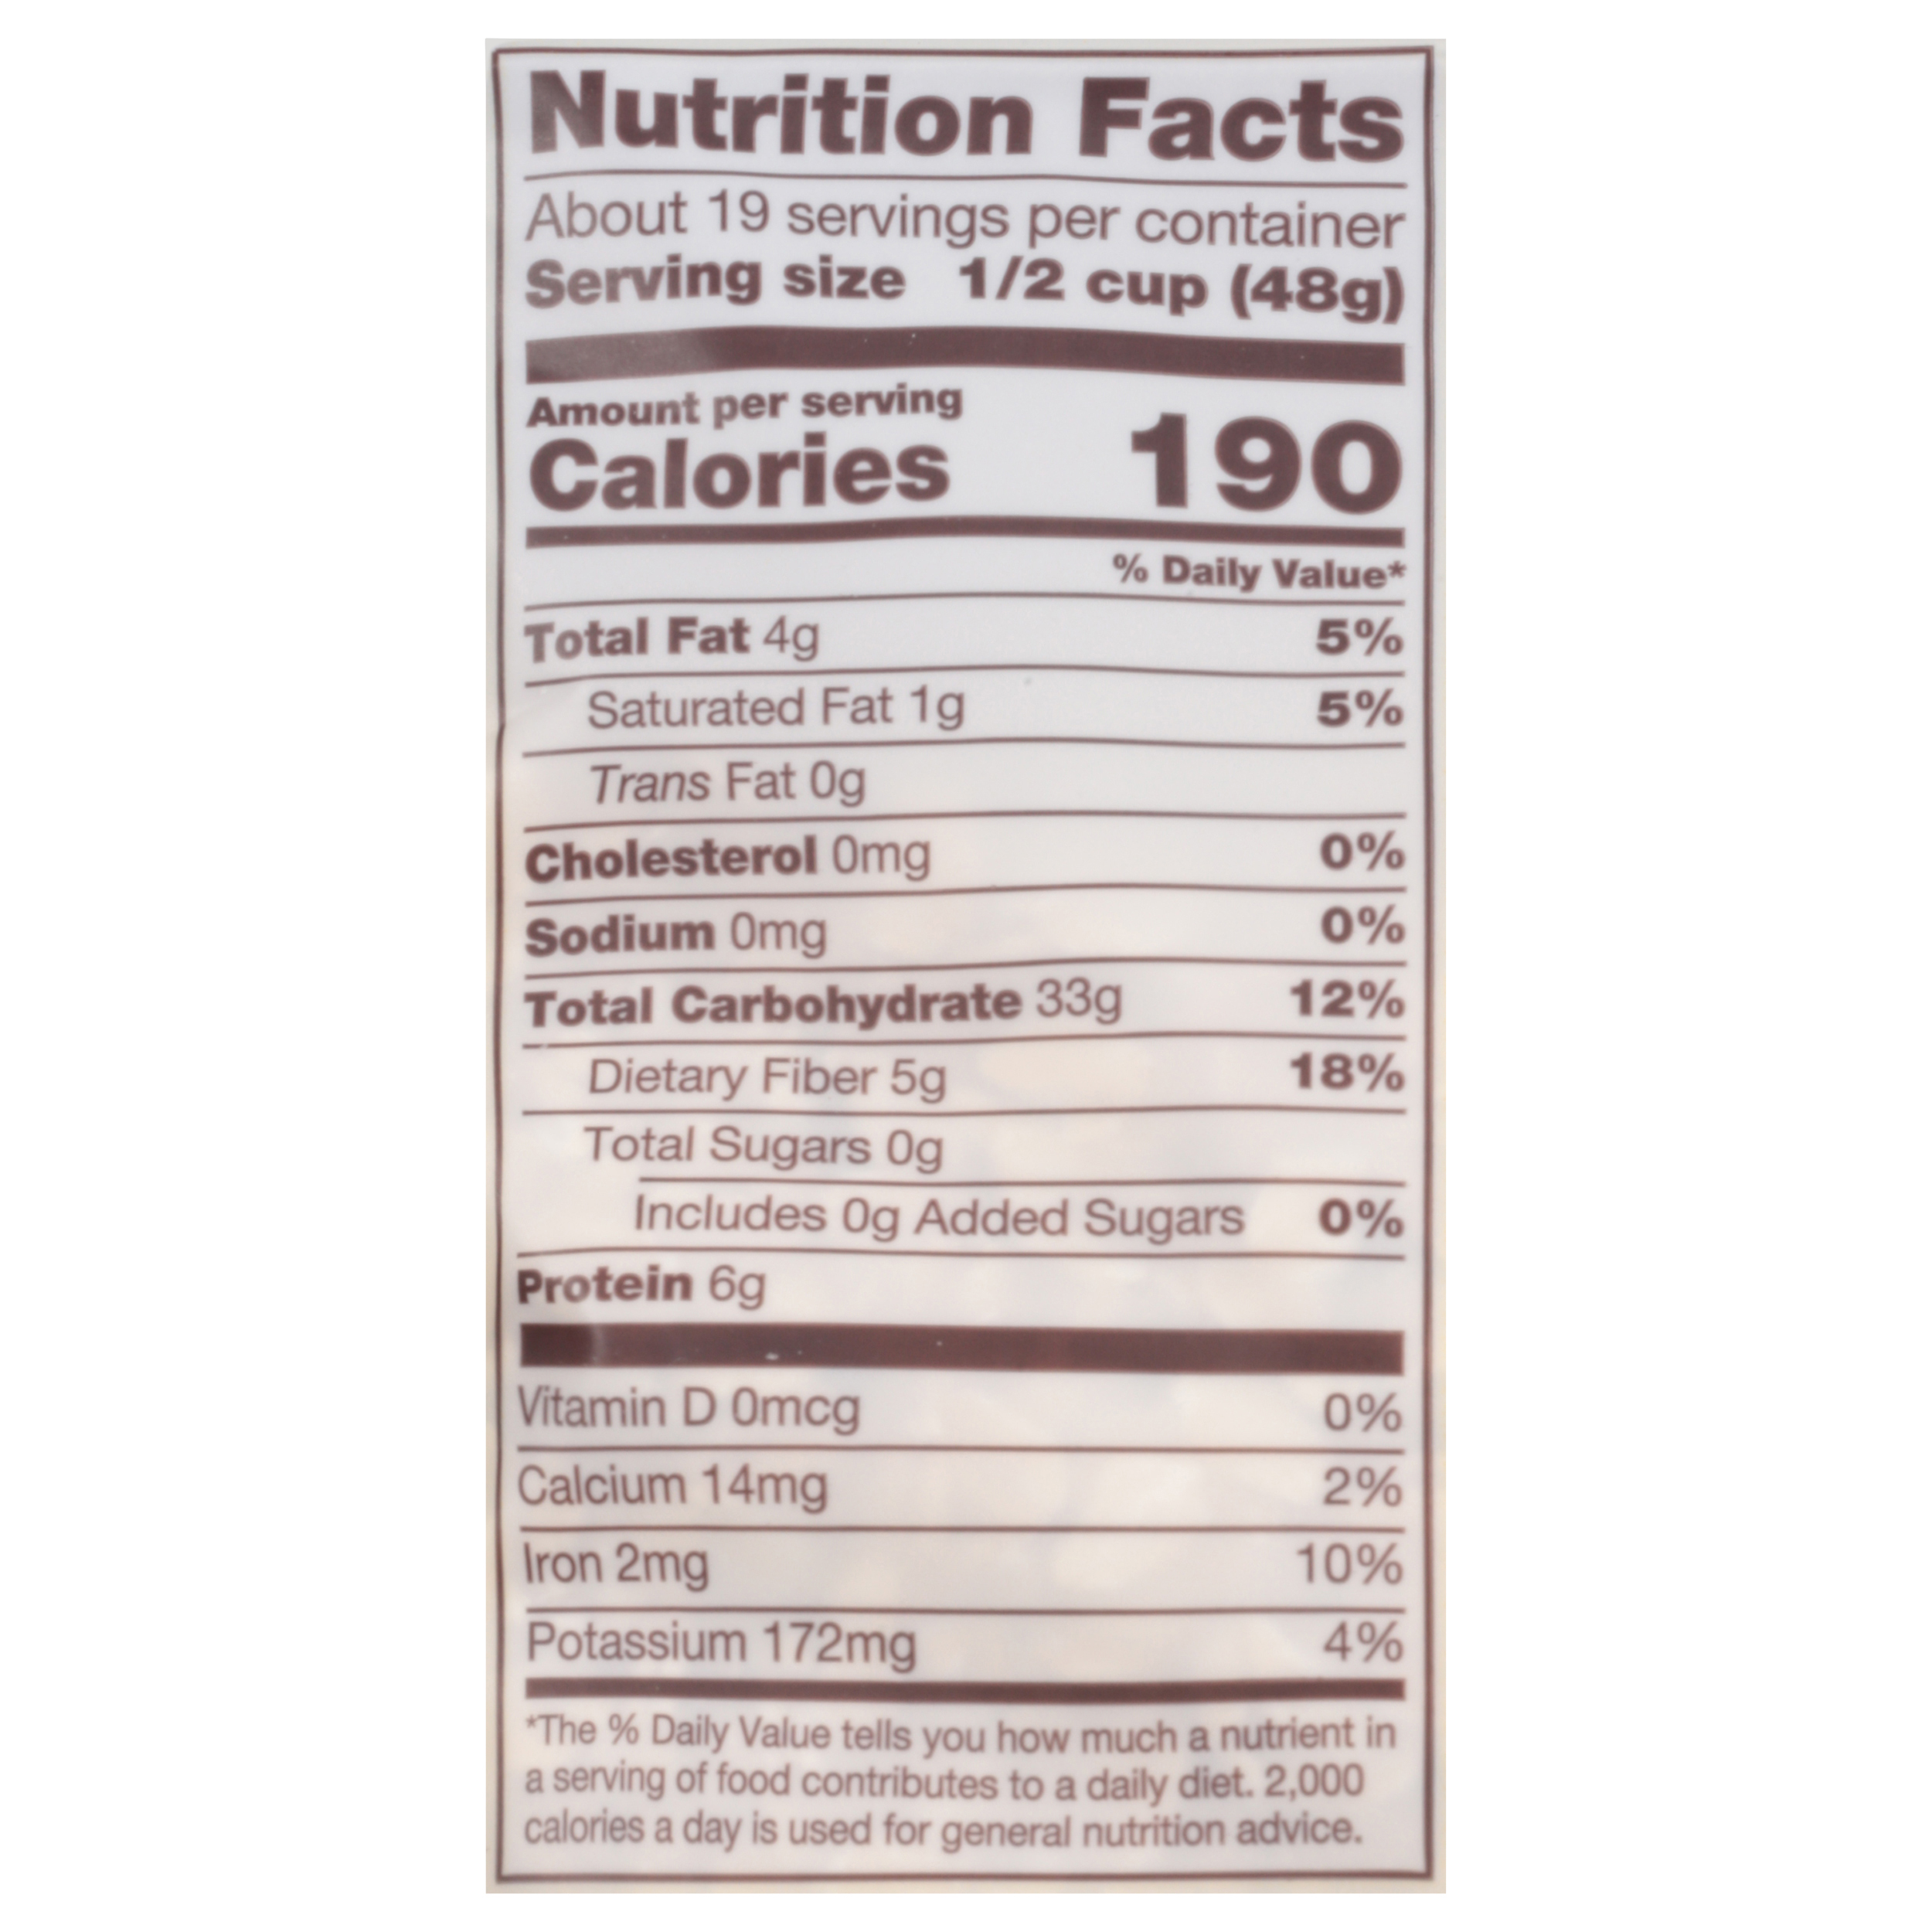 Bob's Red Mill Gluten Free Non-GMO Old Fashioned Rolled Oats, 32 oz Bag Shelf-Stable Ready-to-Cook - image 5 of 6